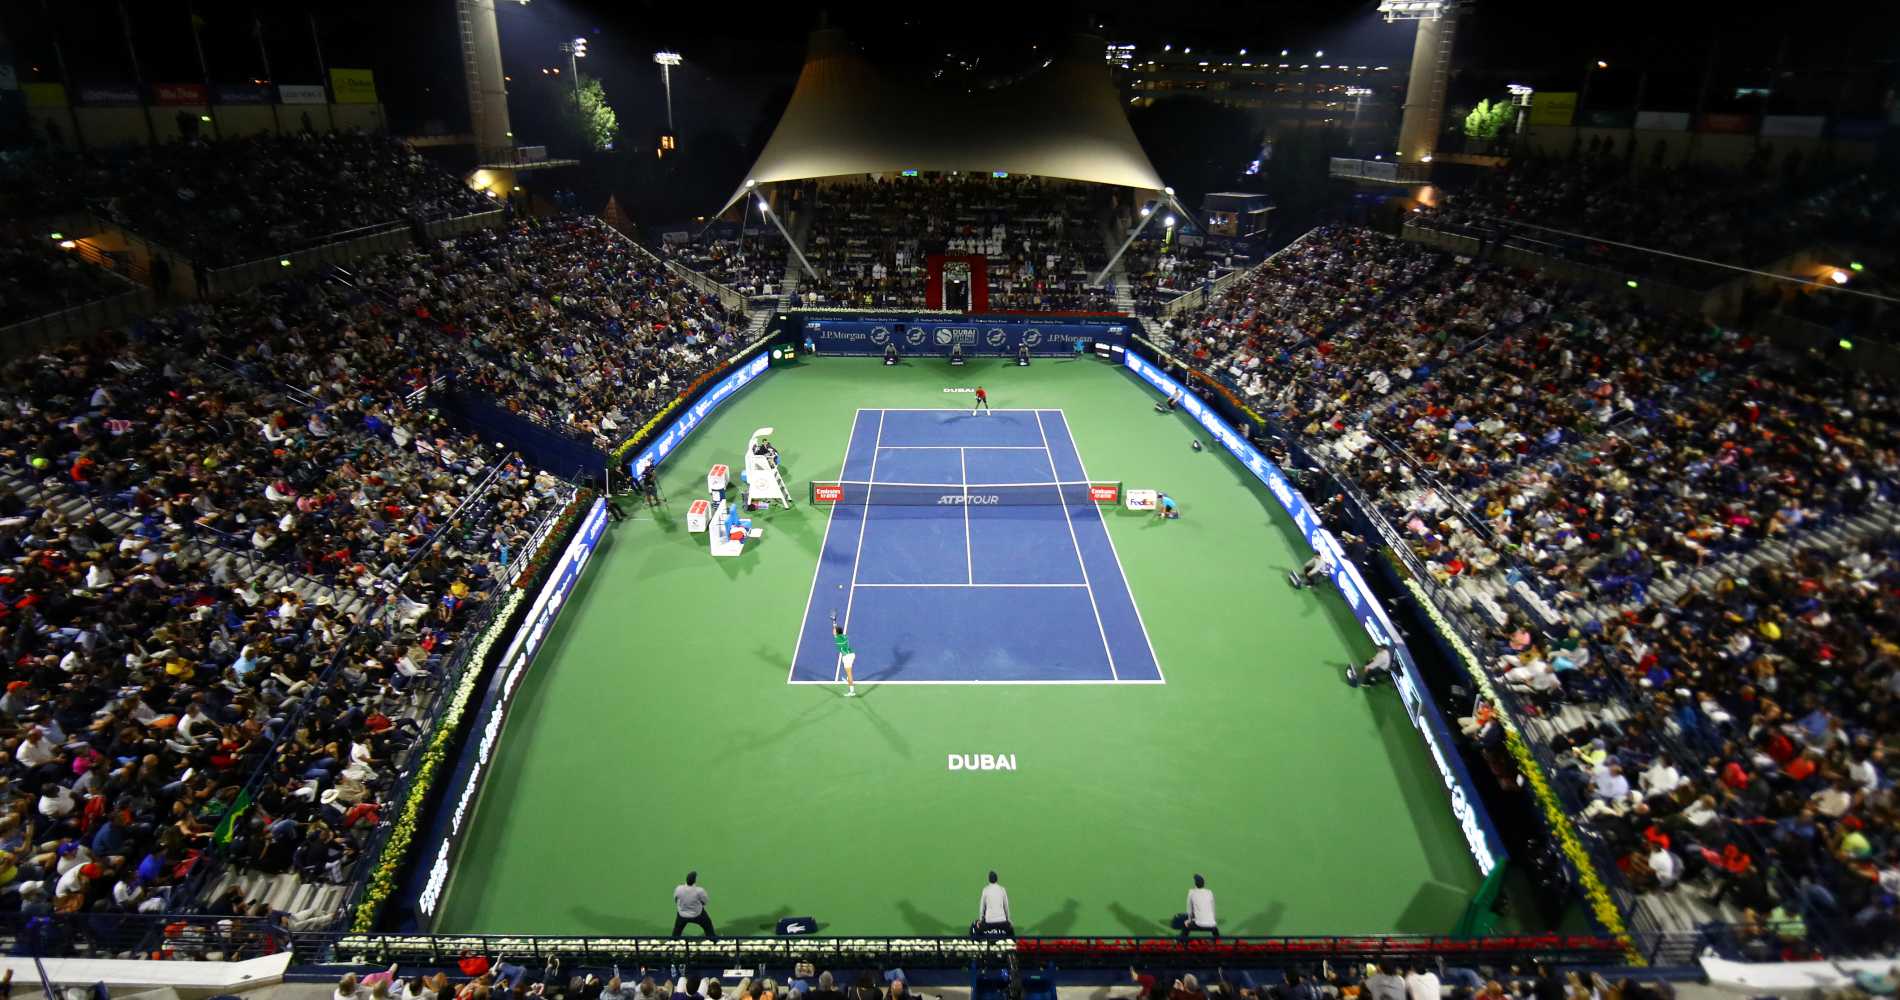 Australian Open 2021: Qualifying in Dubai and former champions to benefit  from bigger entourages? - Tennis Majors